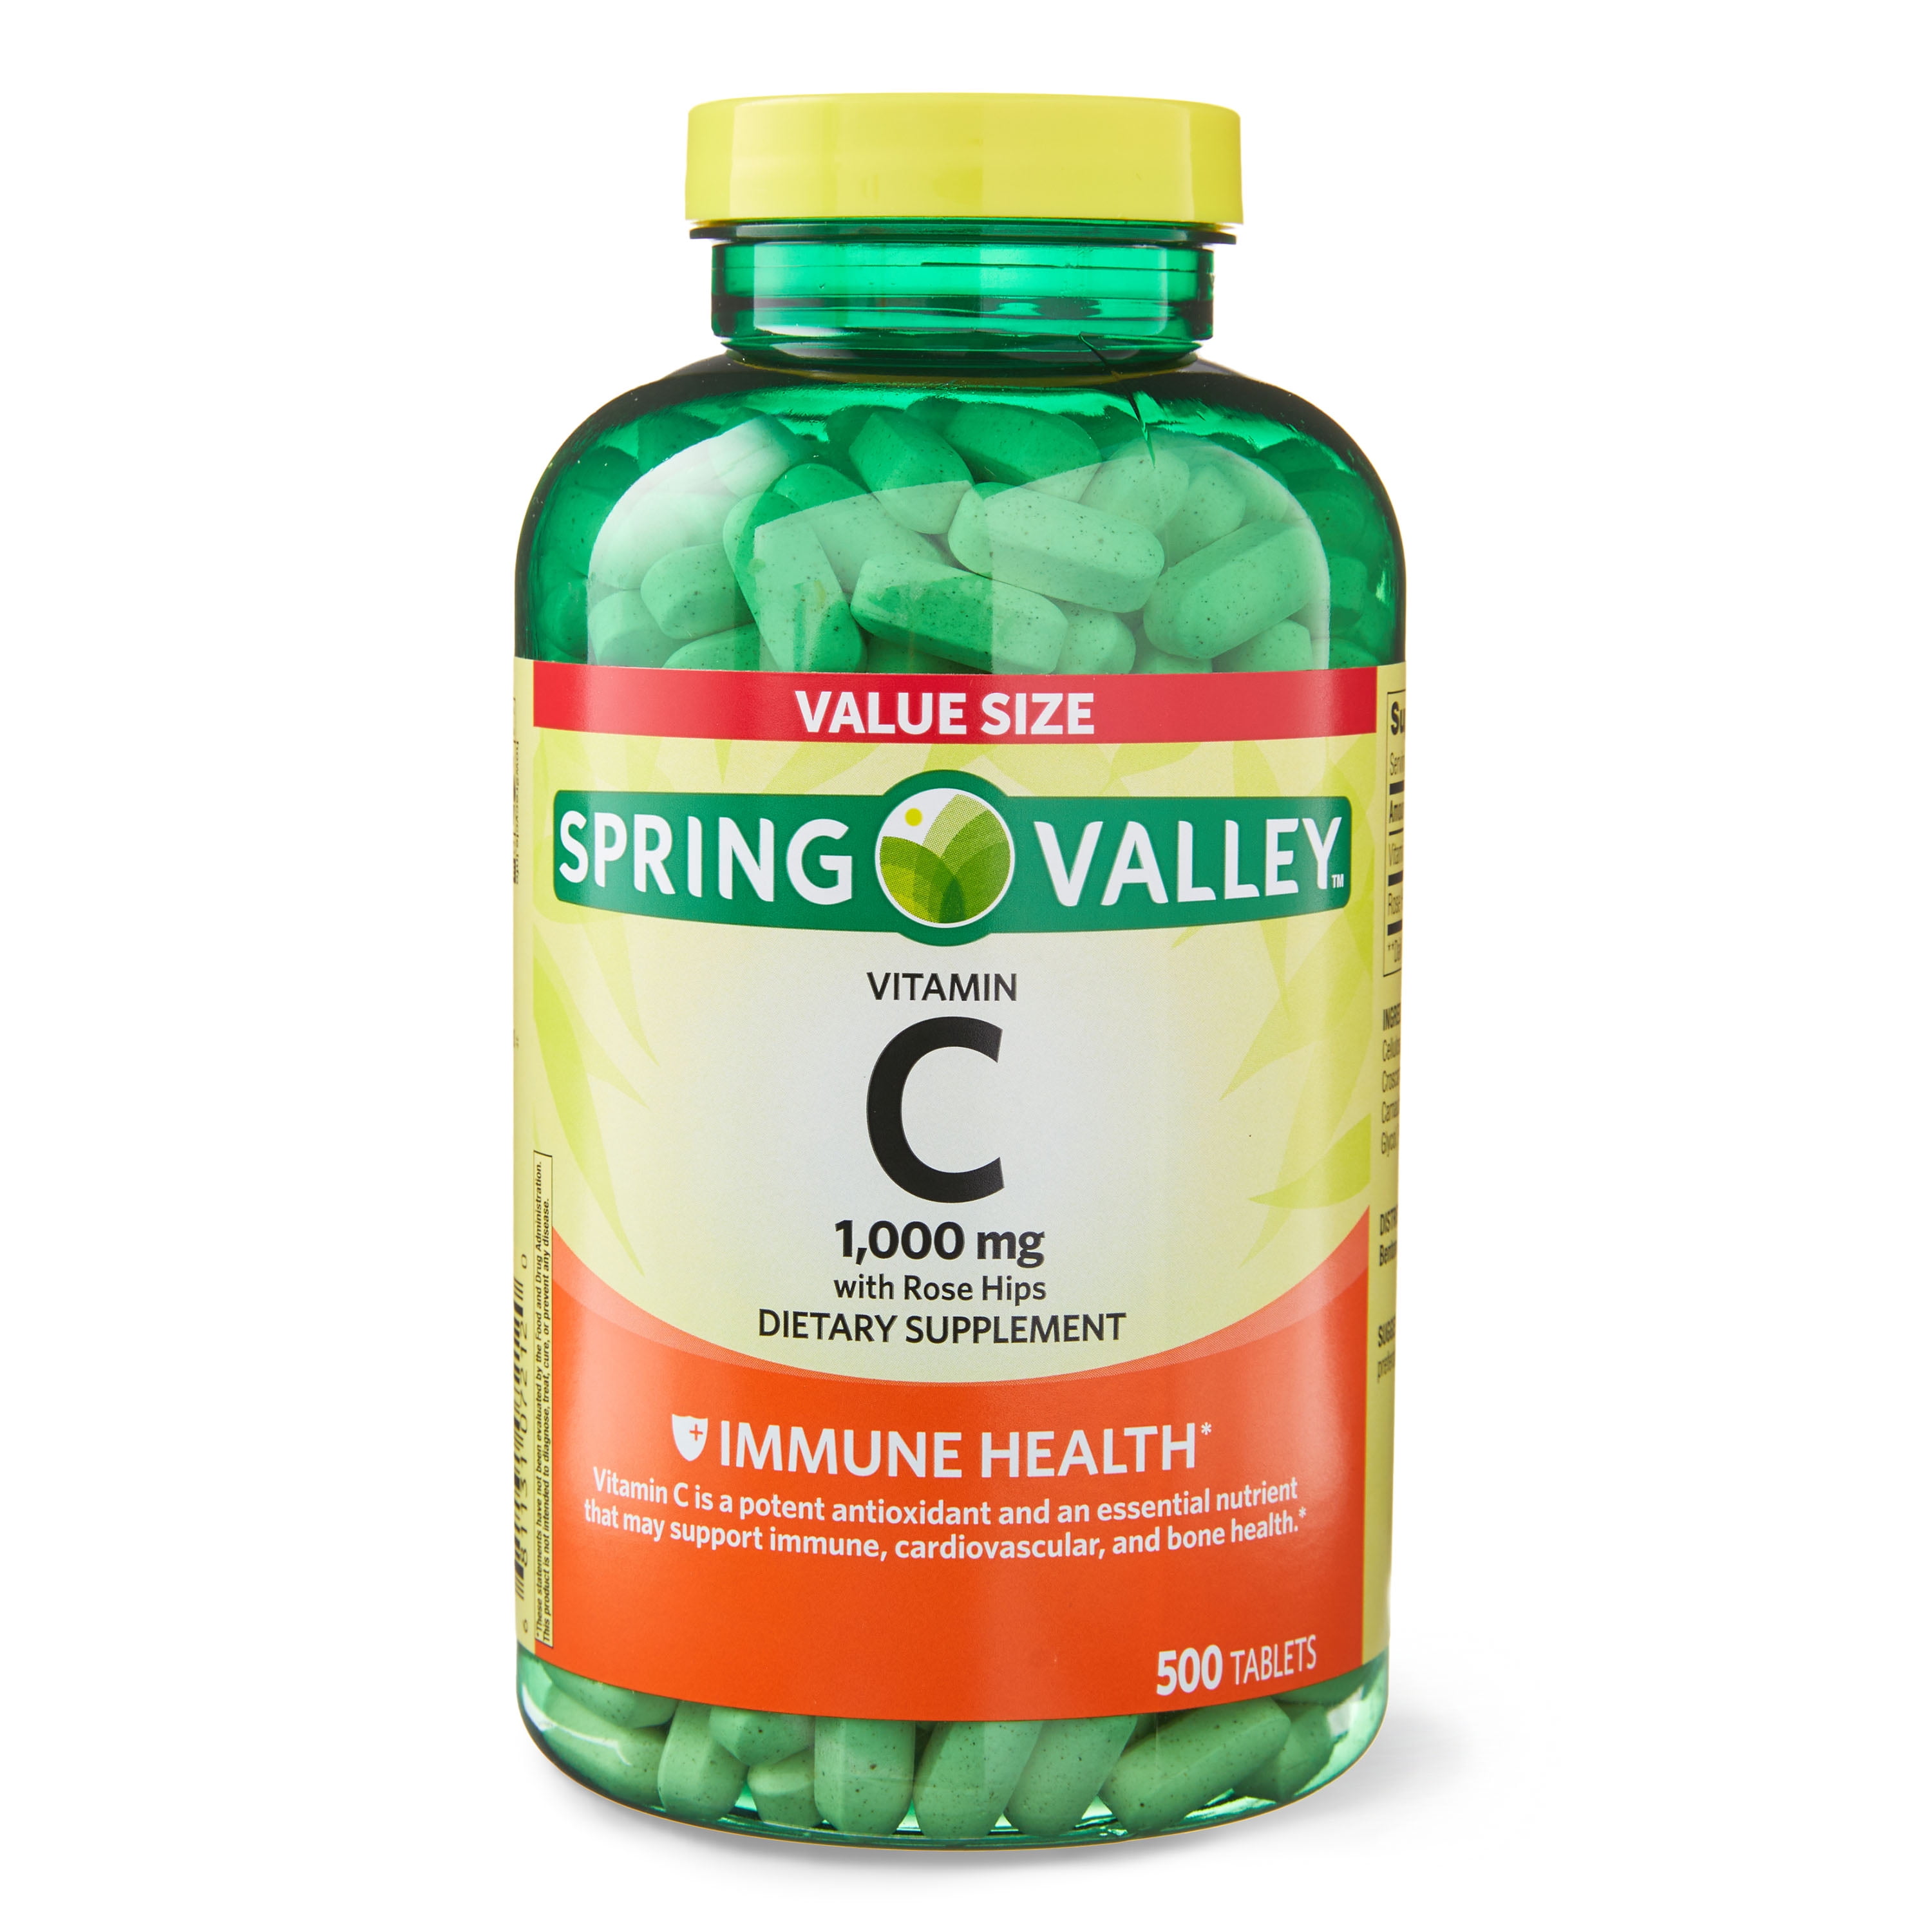 Spring Valley Vitamin C with Rose Hips Tablets Dietary Supplement Value Size, 1,000 mg, 500 Count